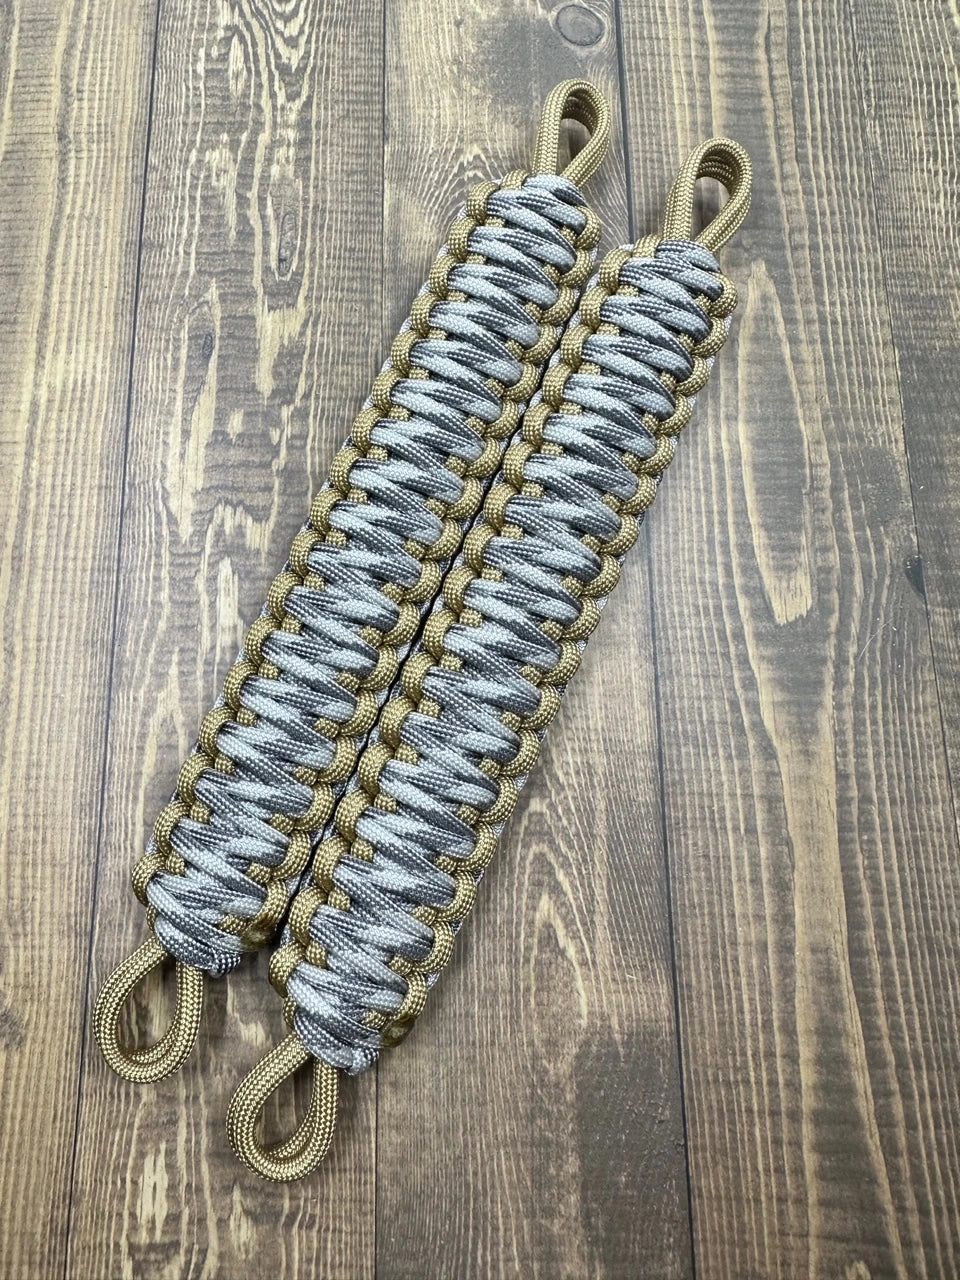 Greyscale and gold nugget grab handles - krawlergrips